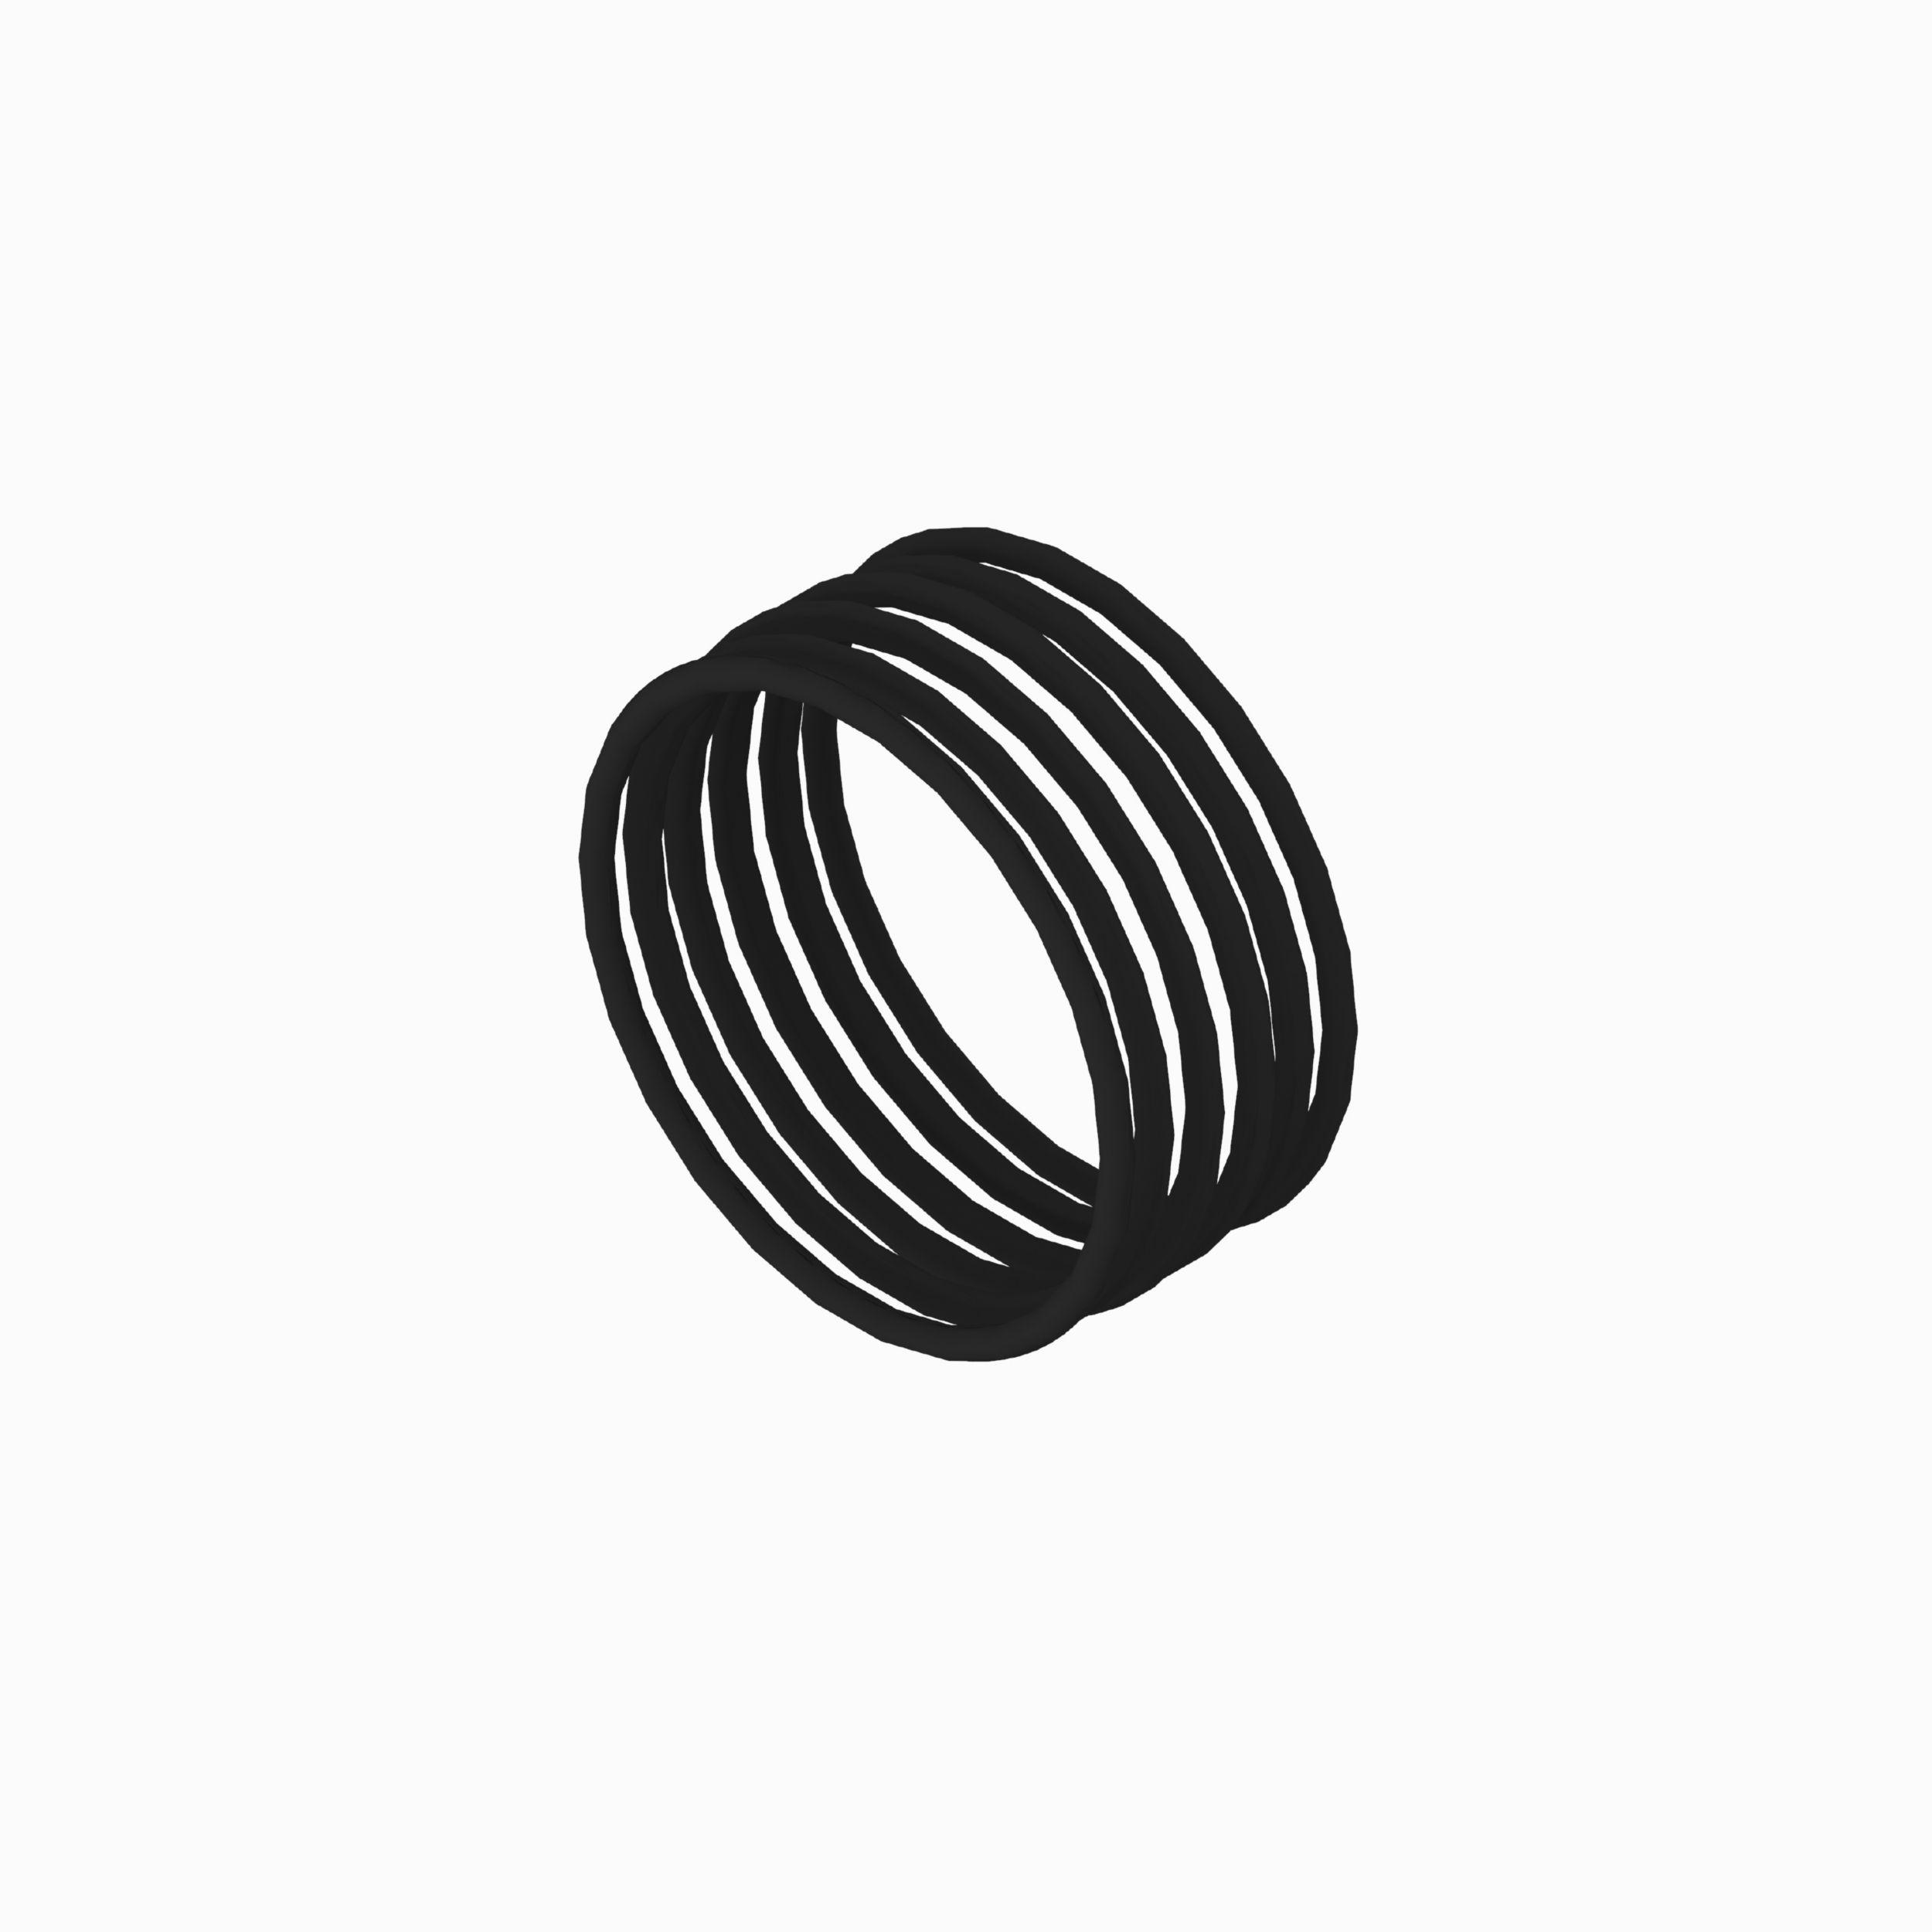 3-916 NBR - O-Rings, Seals and Retaining Rings for Industrial